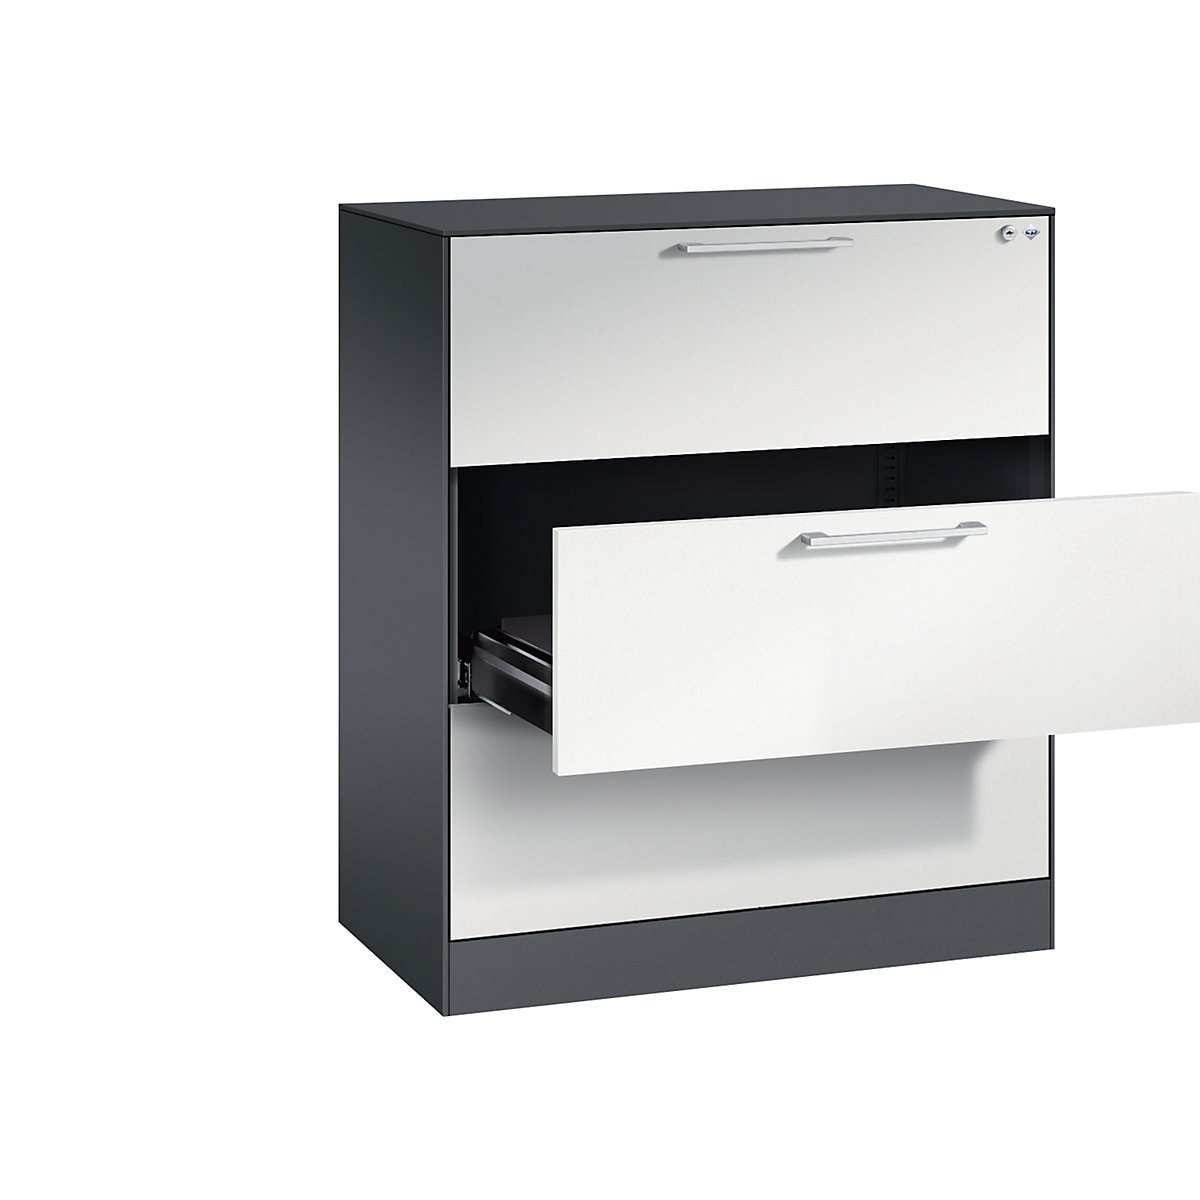 ASISTO card file cabinet – C+P, height 992 mm, with 3 drawers, A4 landscape, black grey/light grey-10